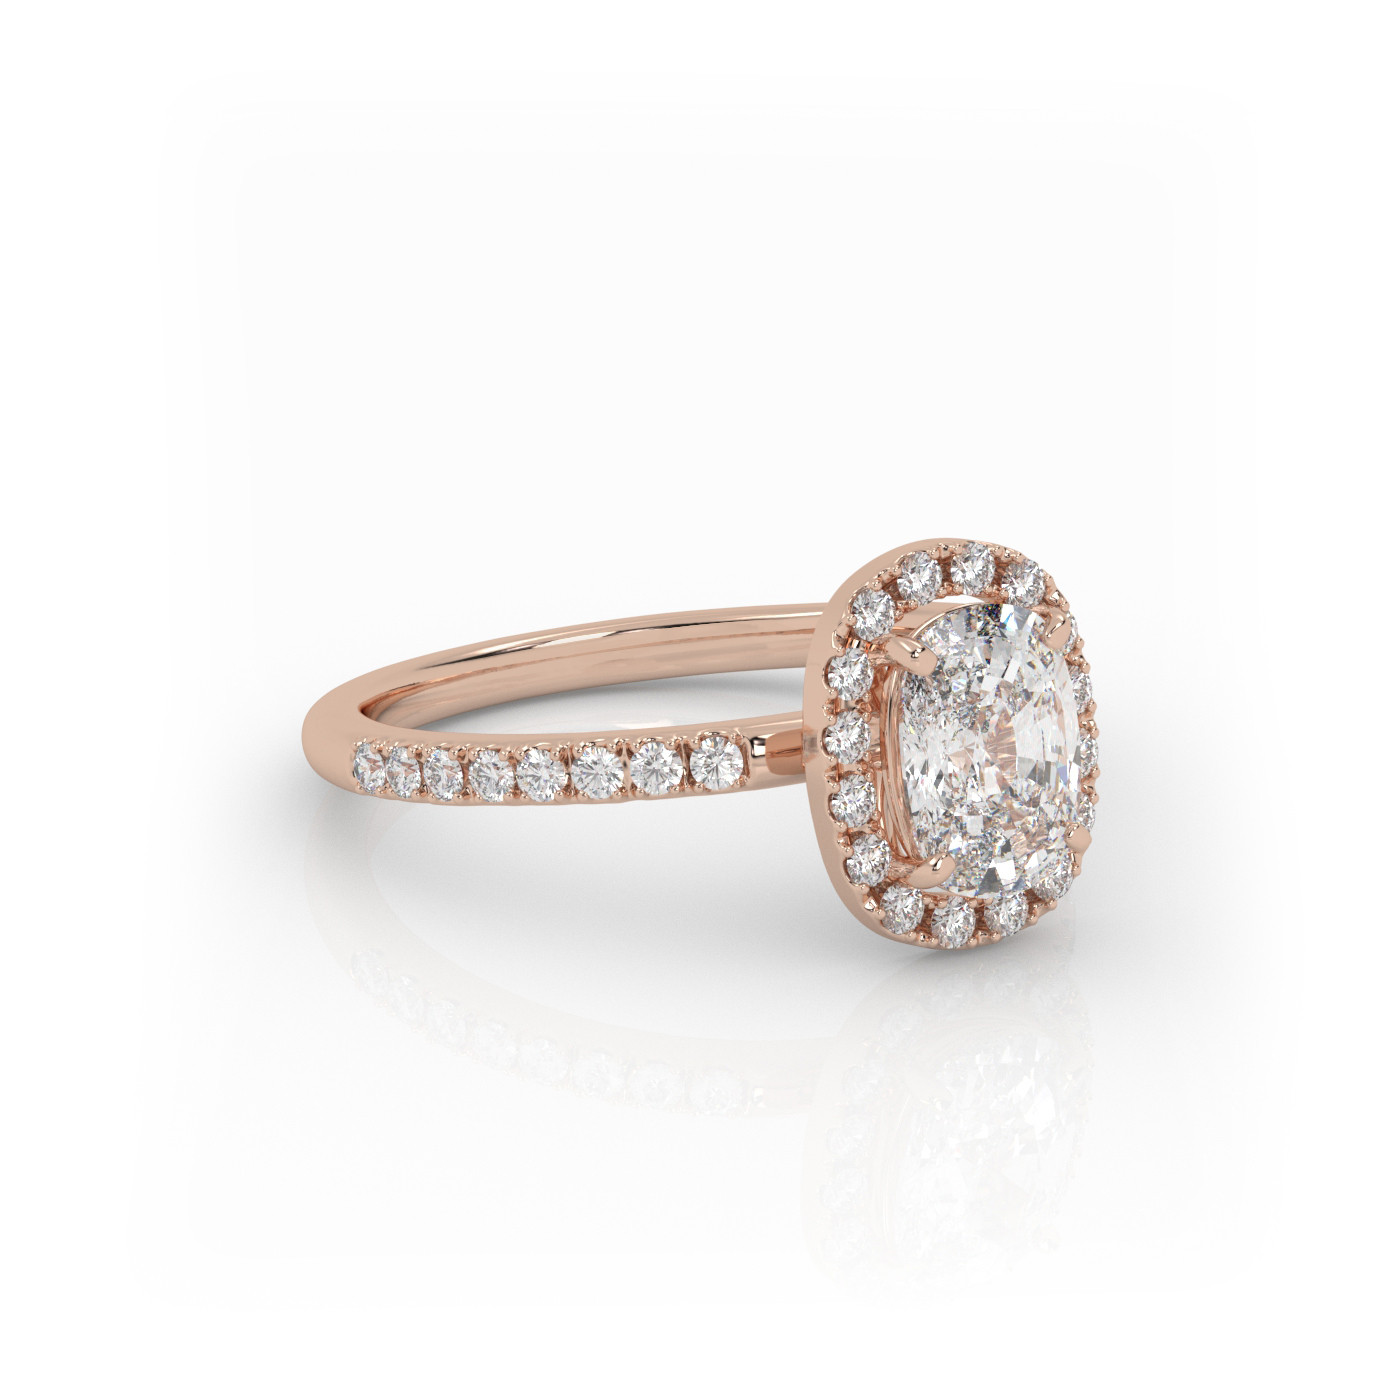 18K ROSE GOLD Elongated Cushion Diamond Engagement Ring With Pave and Halo Style